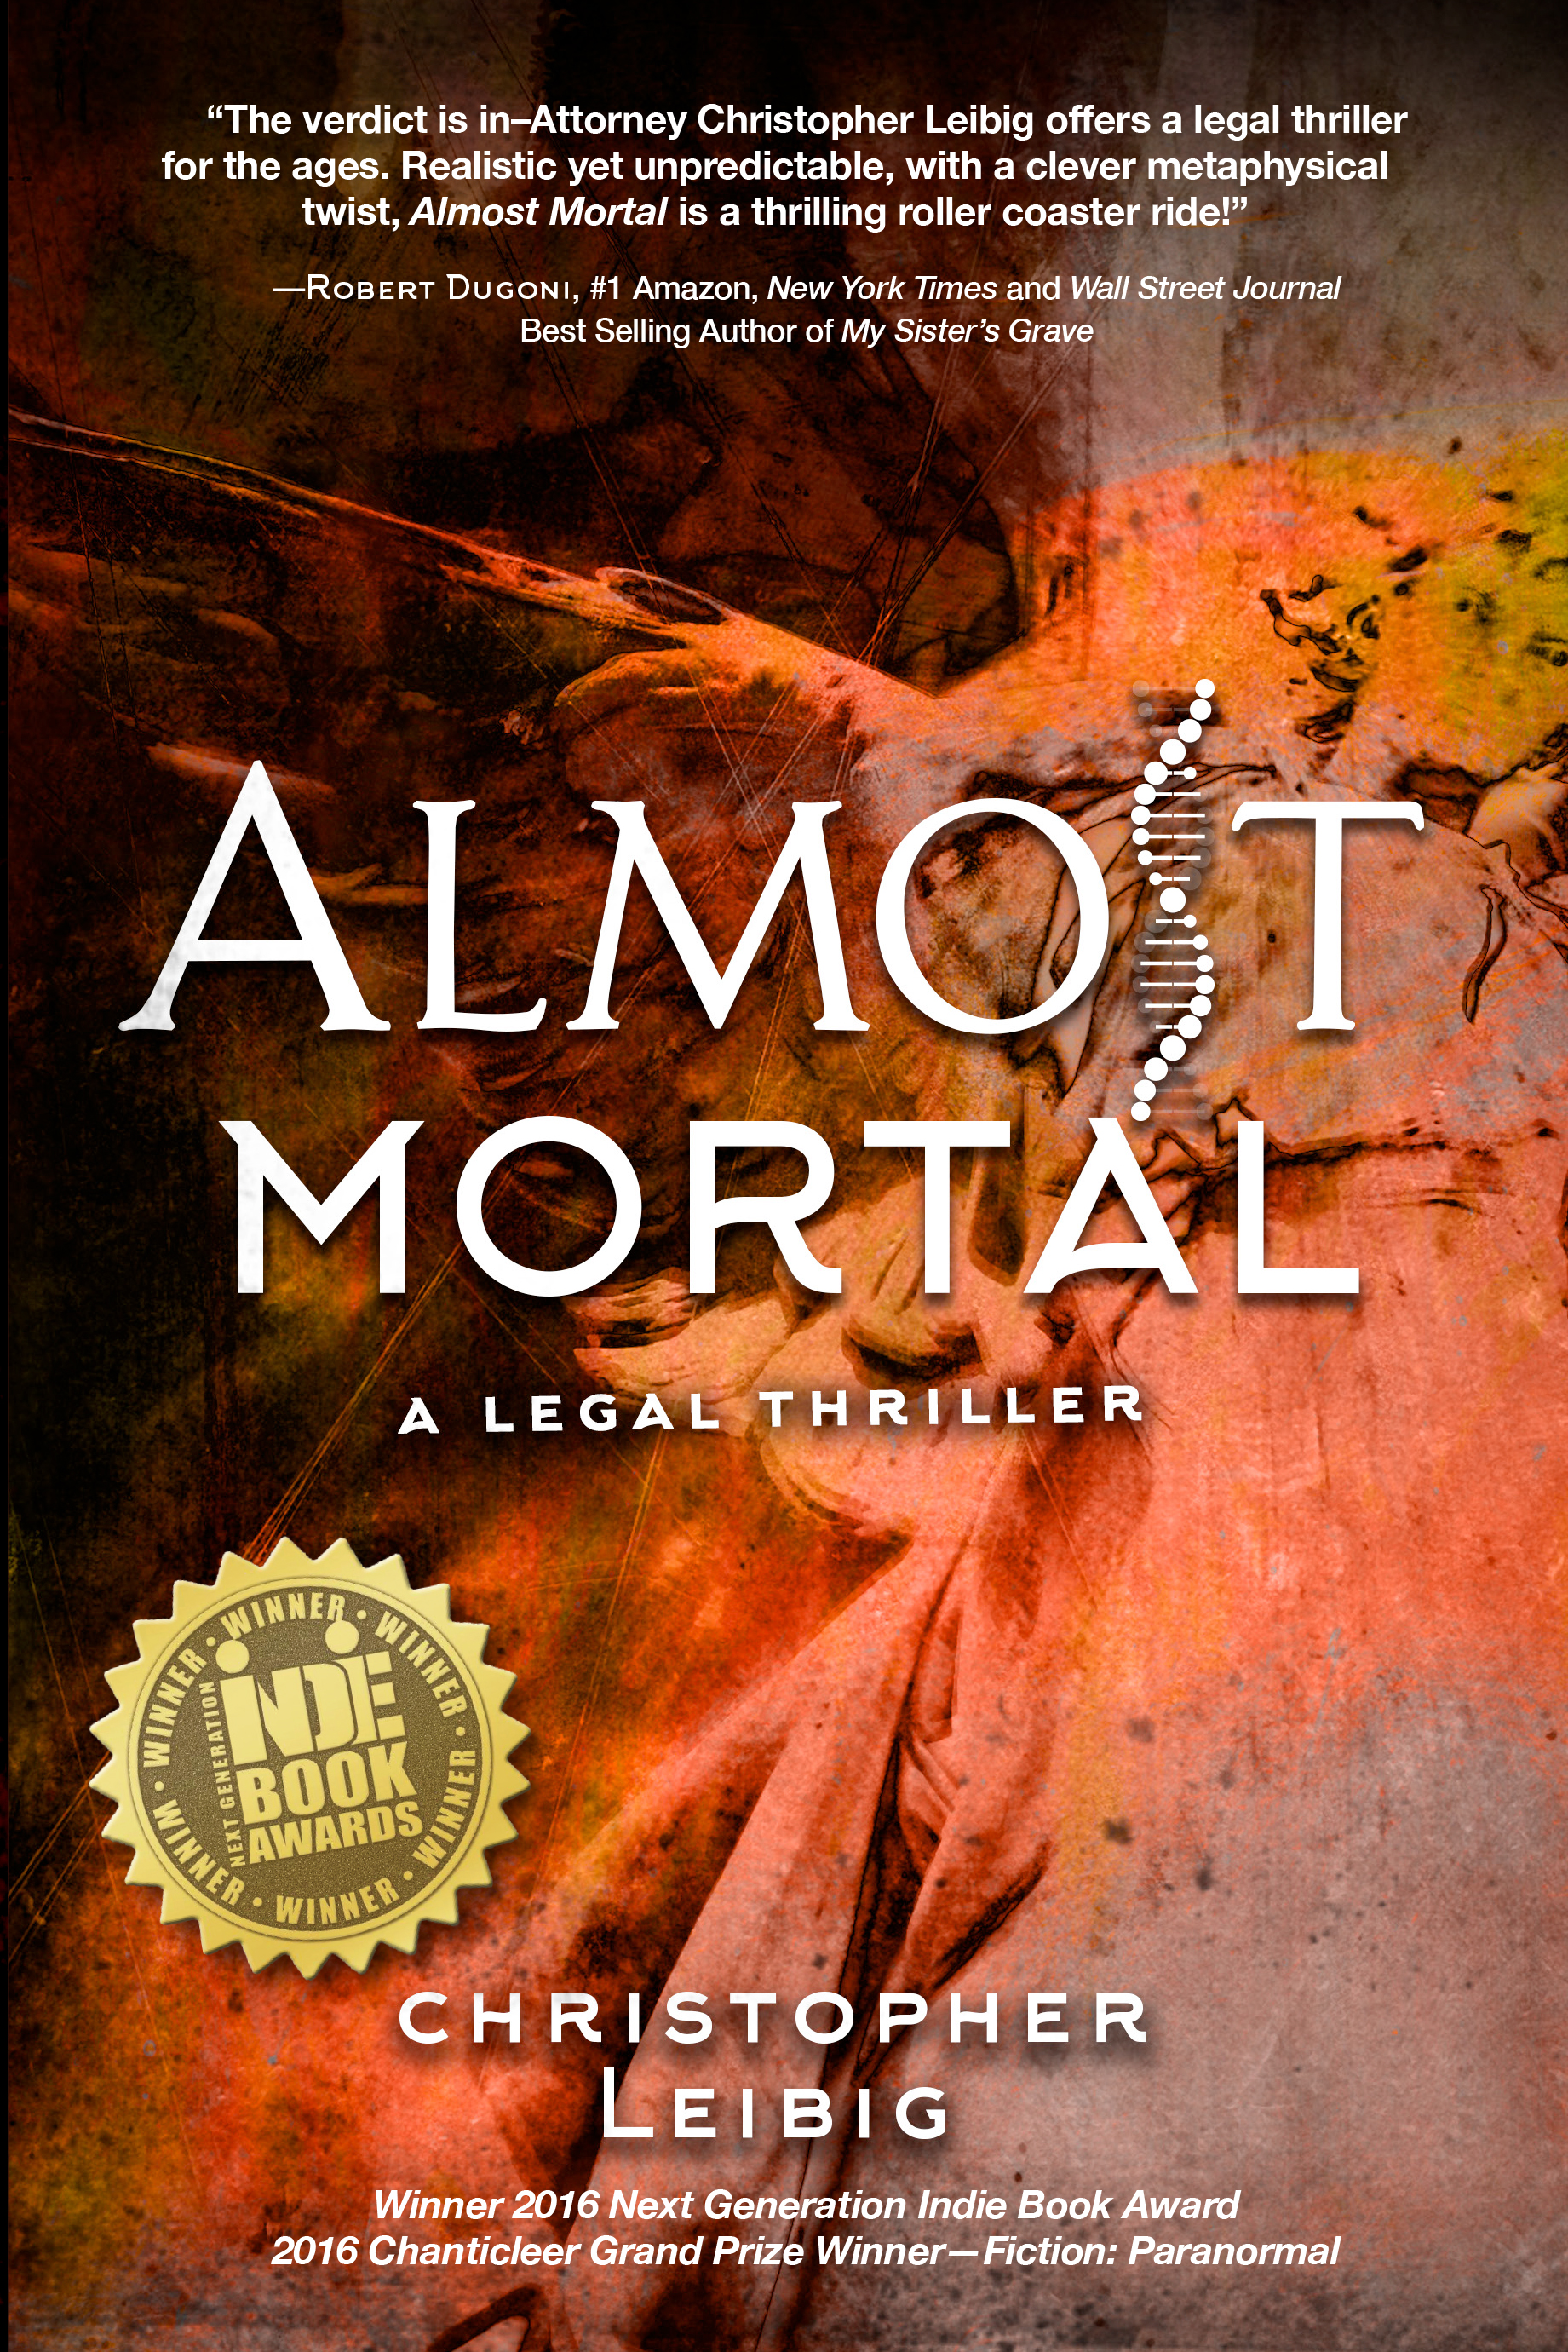 Almost Mortal in Amazon's Top 100 Legal Thrillers!